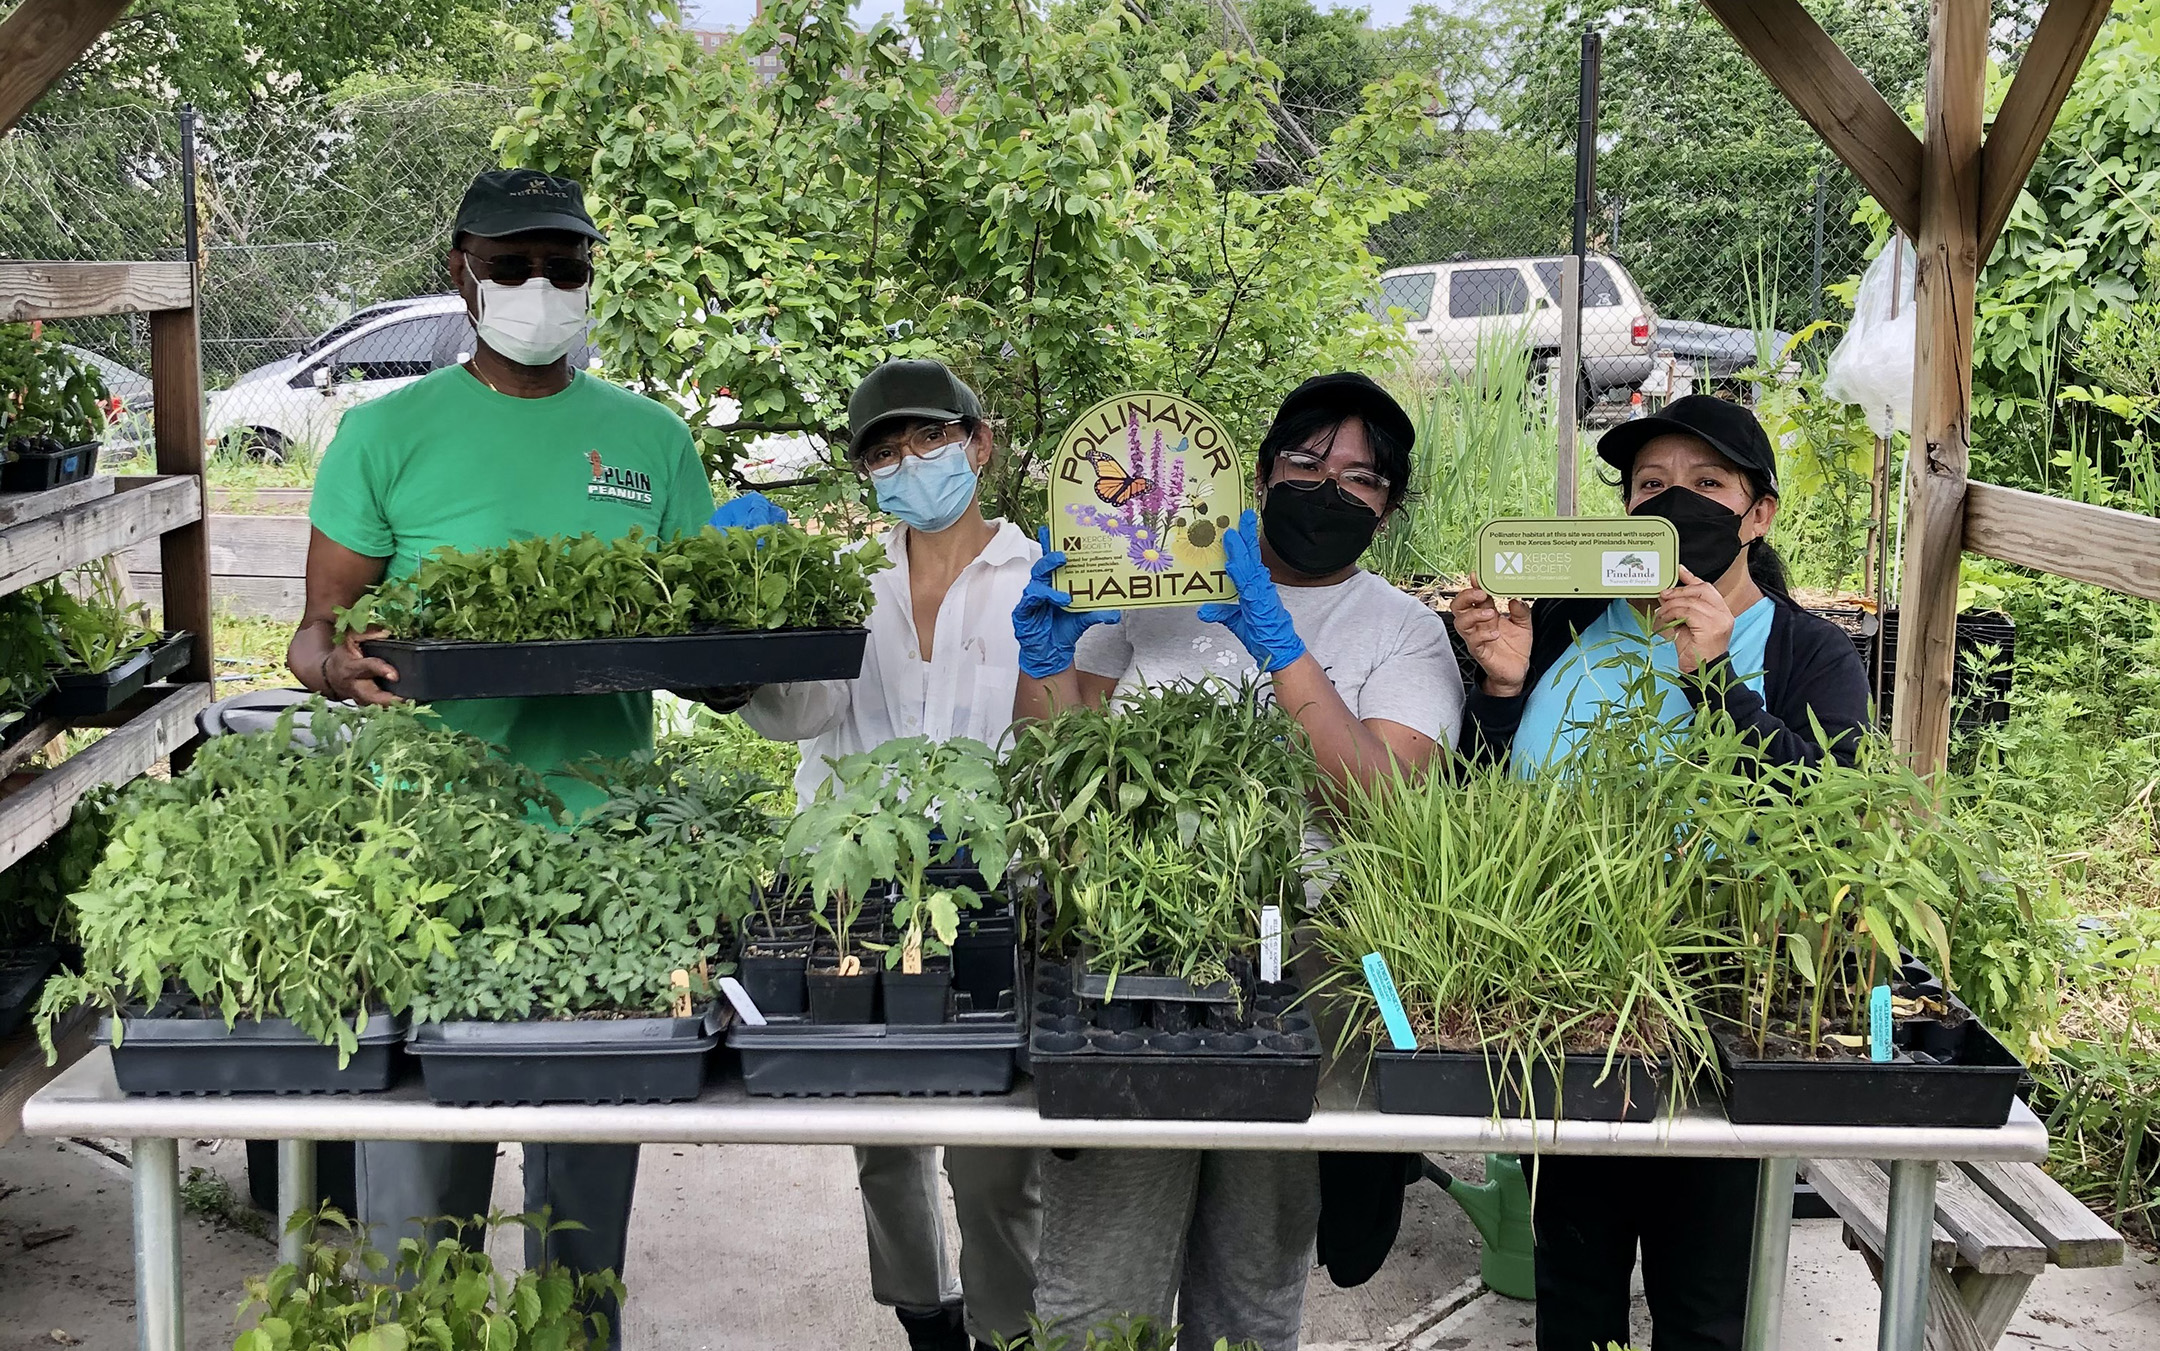 Four people stand behind a table laden with trays of small plants. They are holding plants and "pollinator habitat" signs ready for a day of hard work.